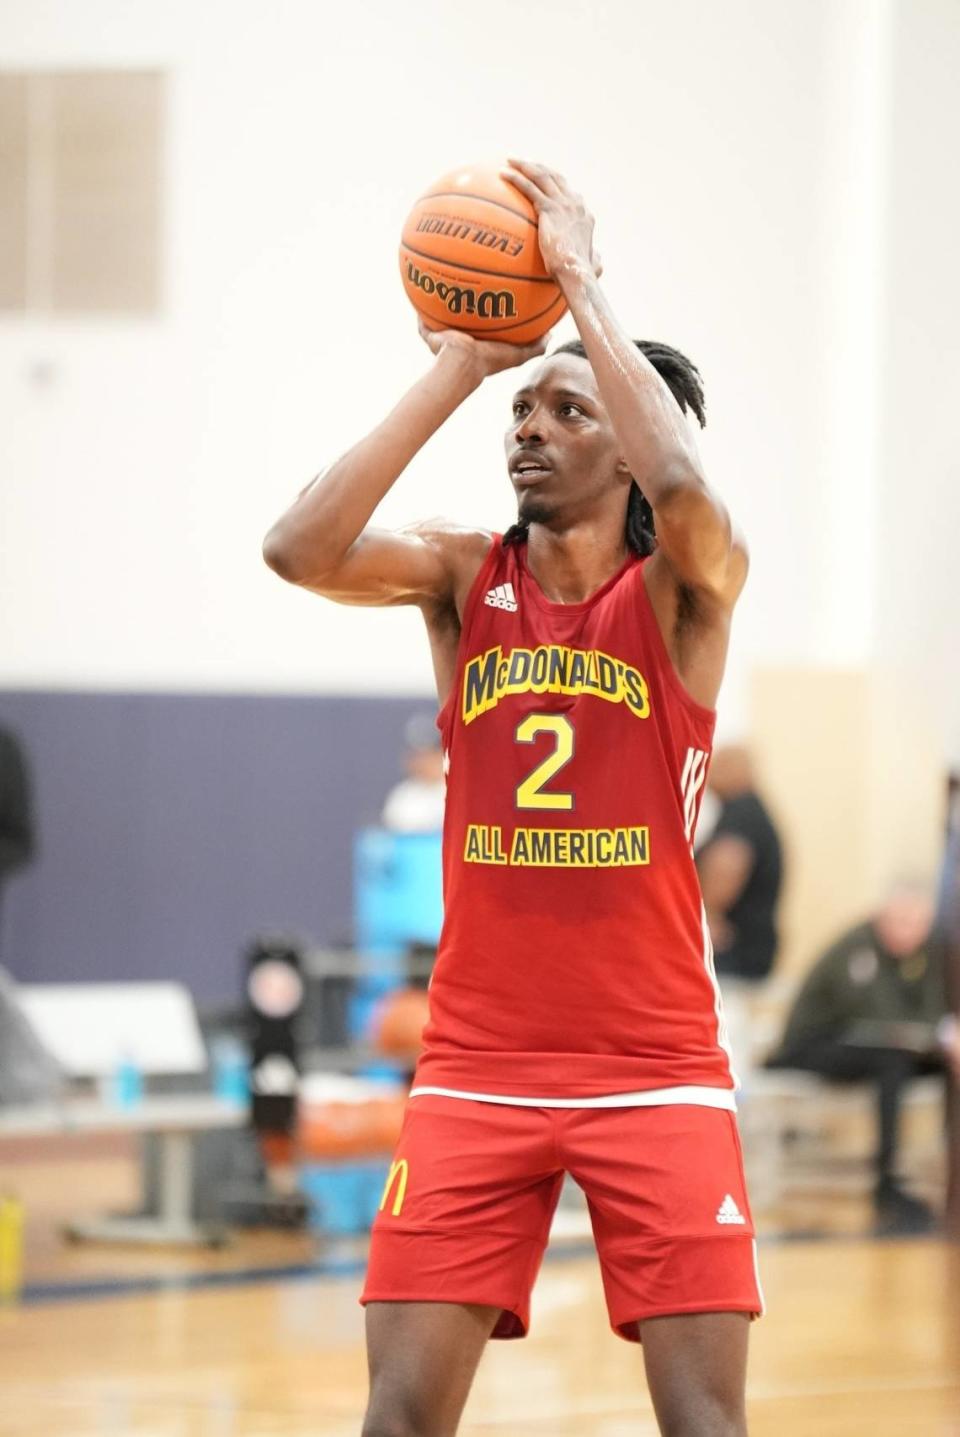 Aaron Bradshaw shoots the ball during practice ahead of the 2023 McDonald’s All-American Game in Houston, Texas. Bradshaw described himself as energetic and fun during Monday’s McDonald’s All-American Game media day.